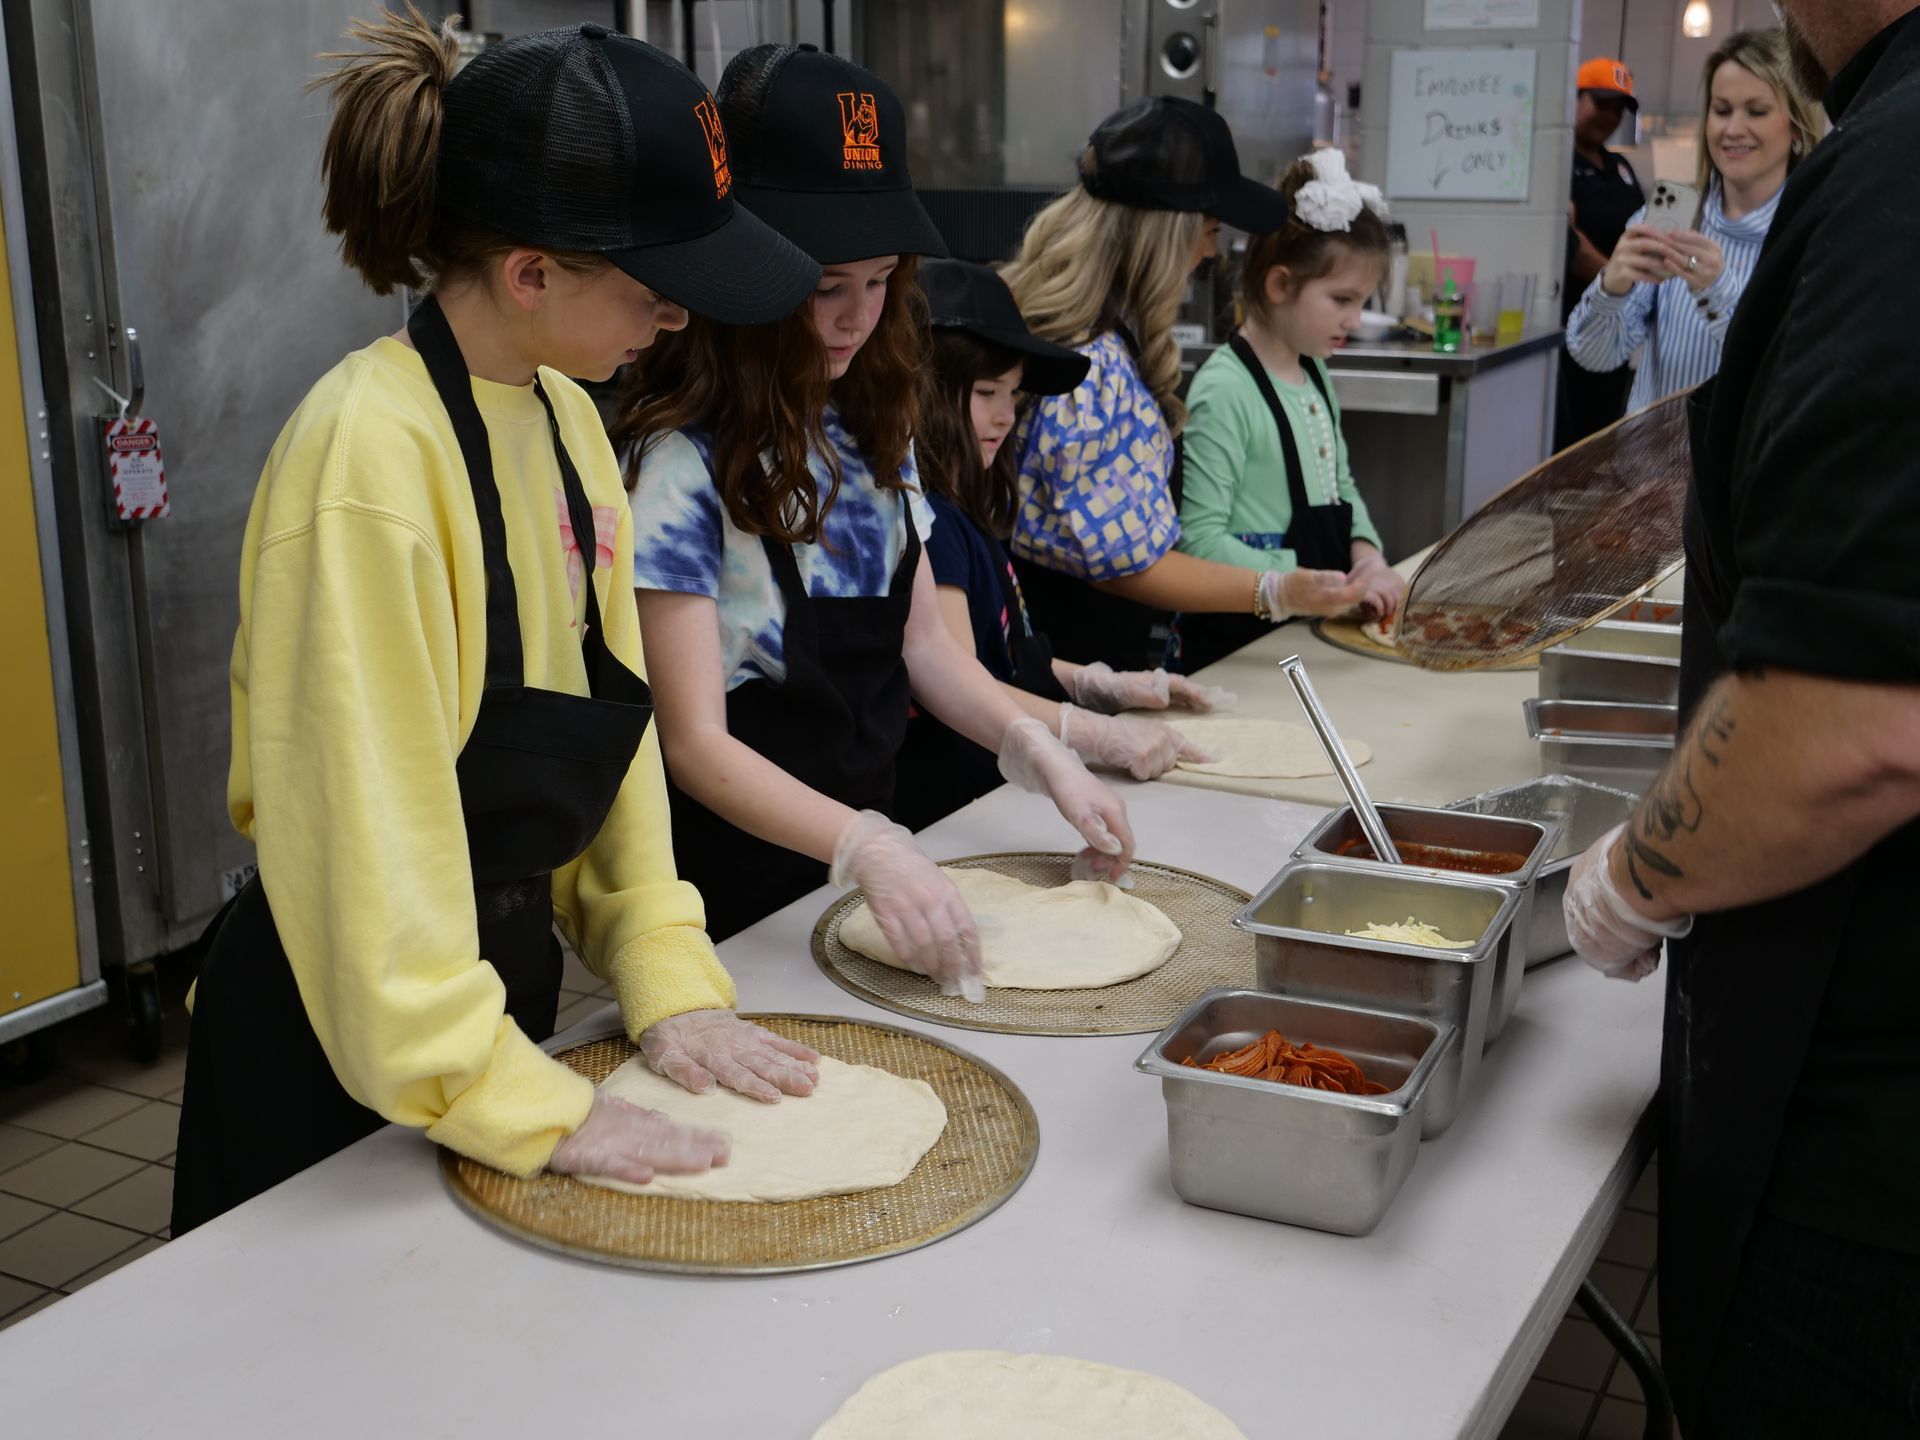 attendees make pizza alongside Union Dining staff